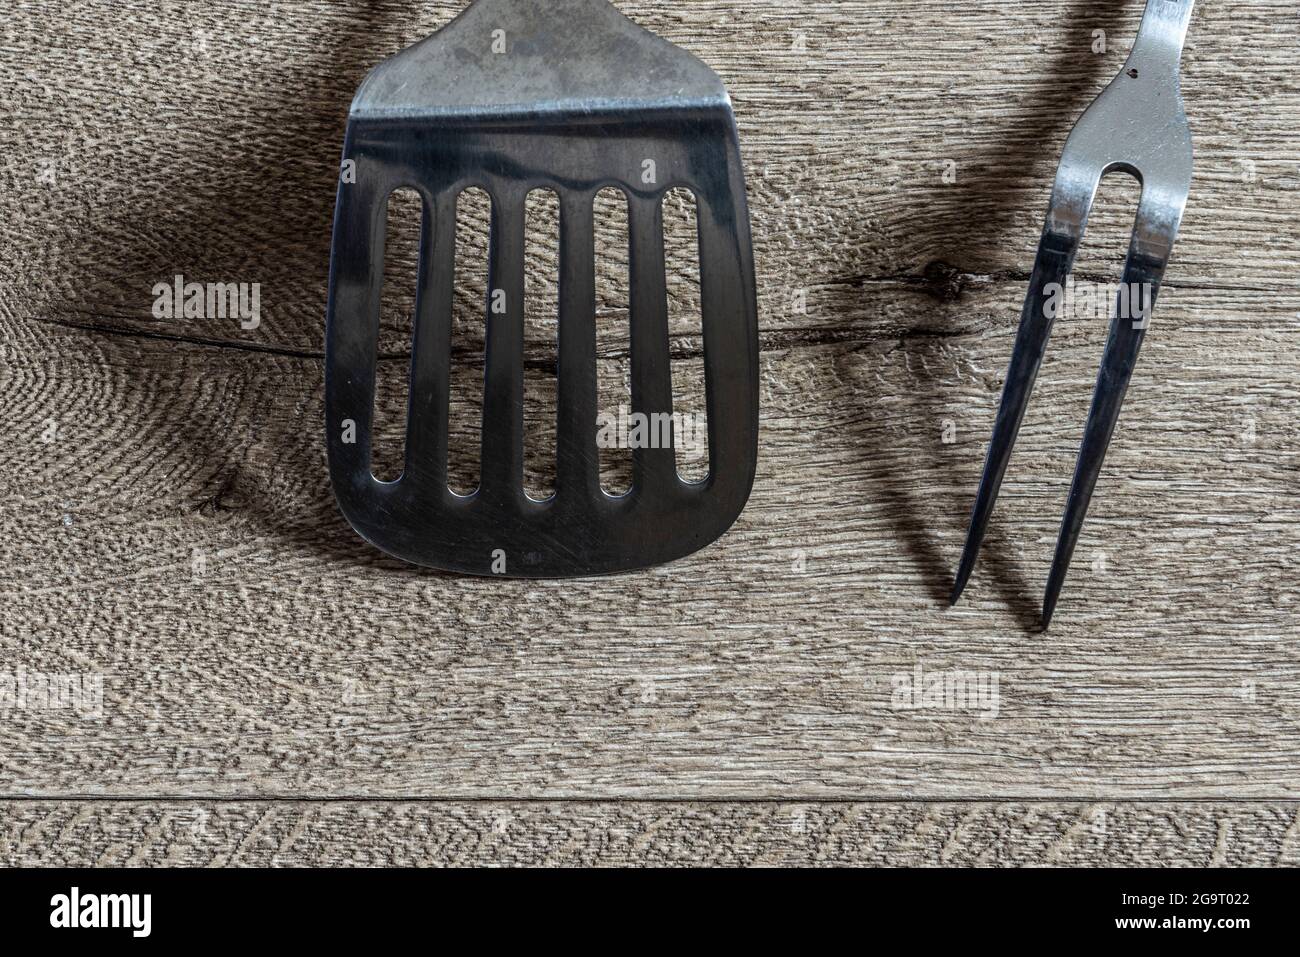 kitchen objects on a brown texture. Stock Photo